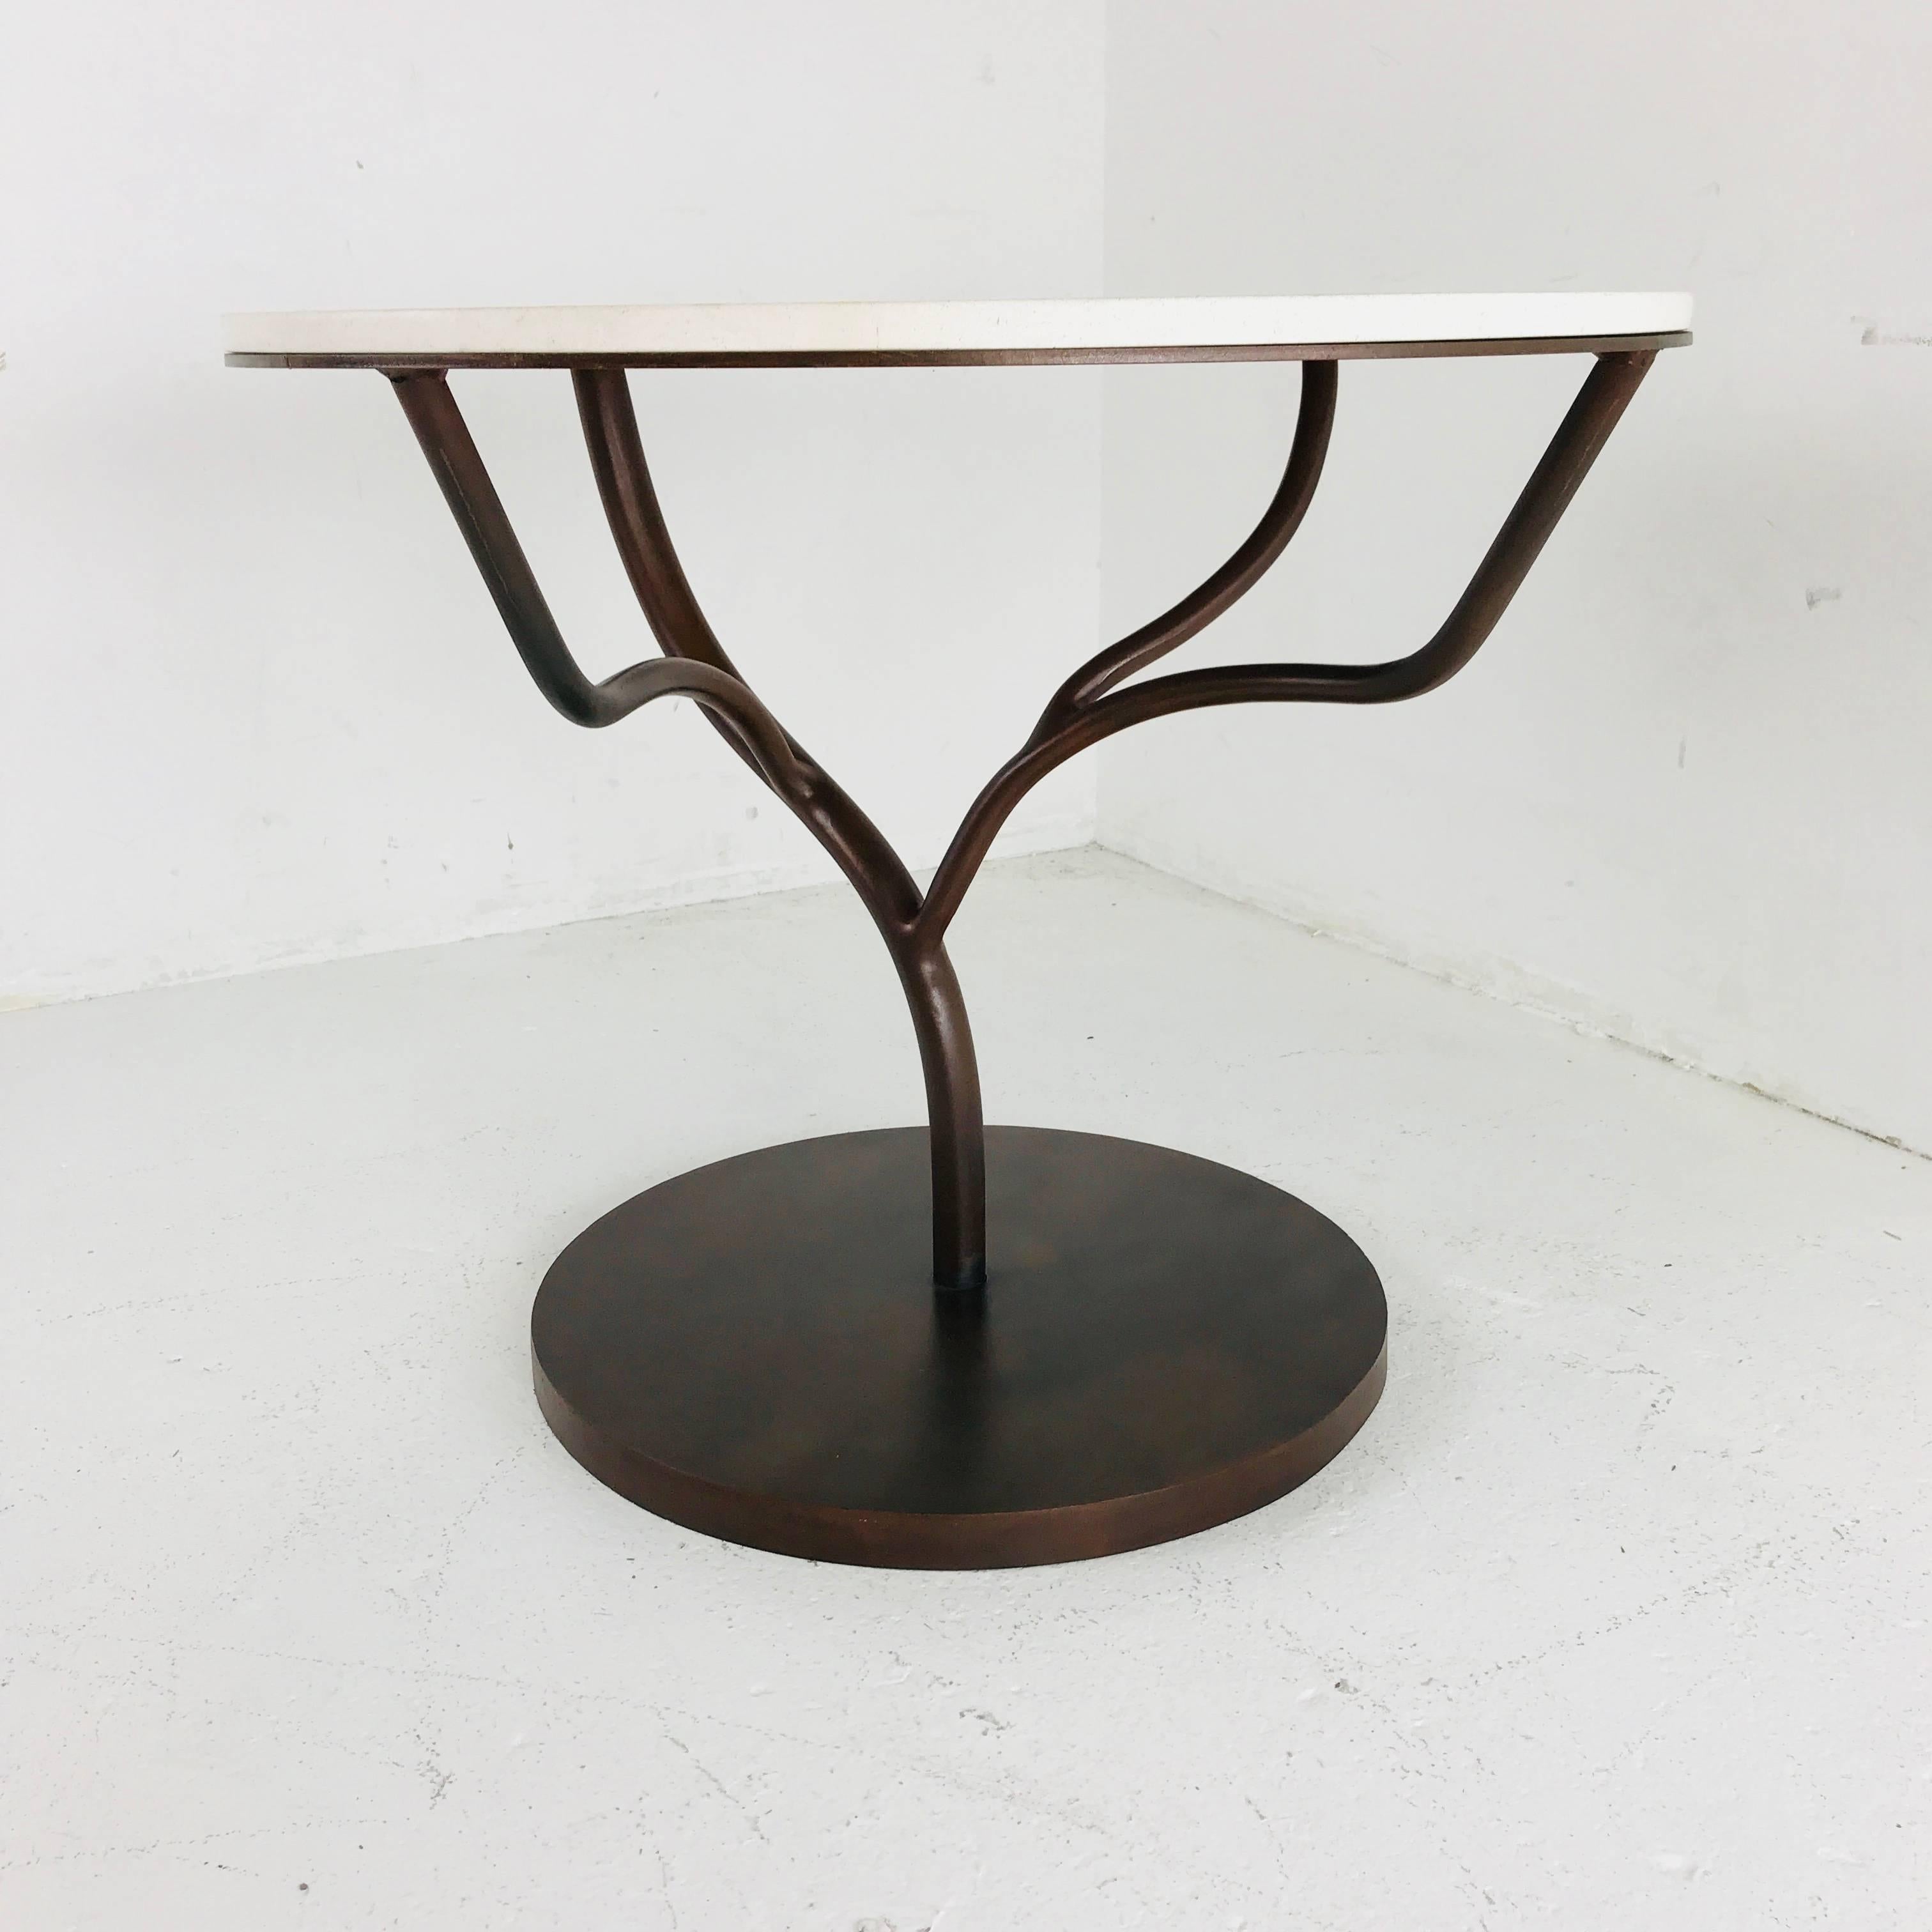 Limestone top vine occasional table with oxidized finish. Perfect as a centre table or entry table.

Dimensions: 33